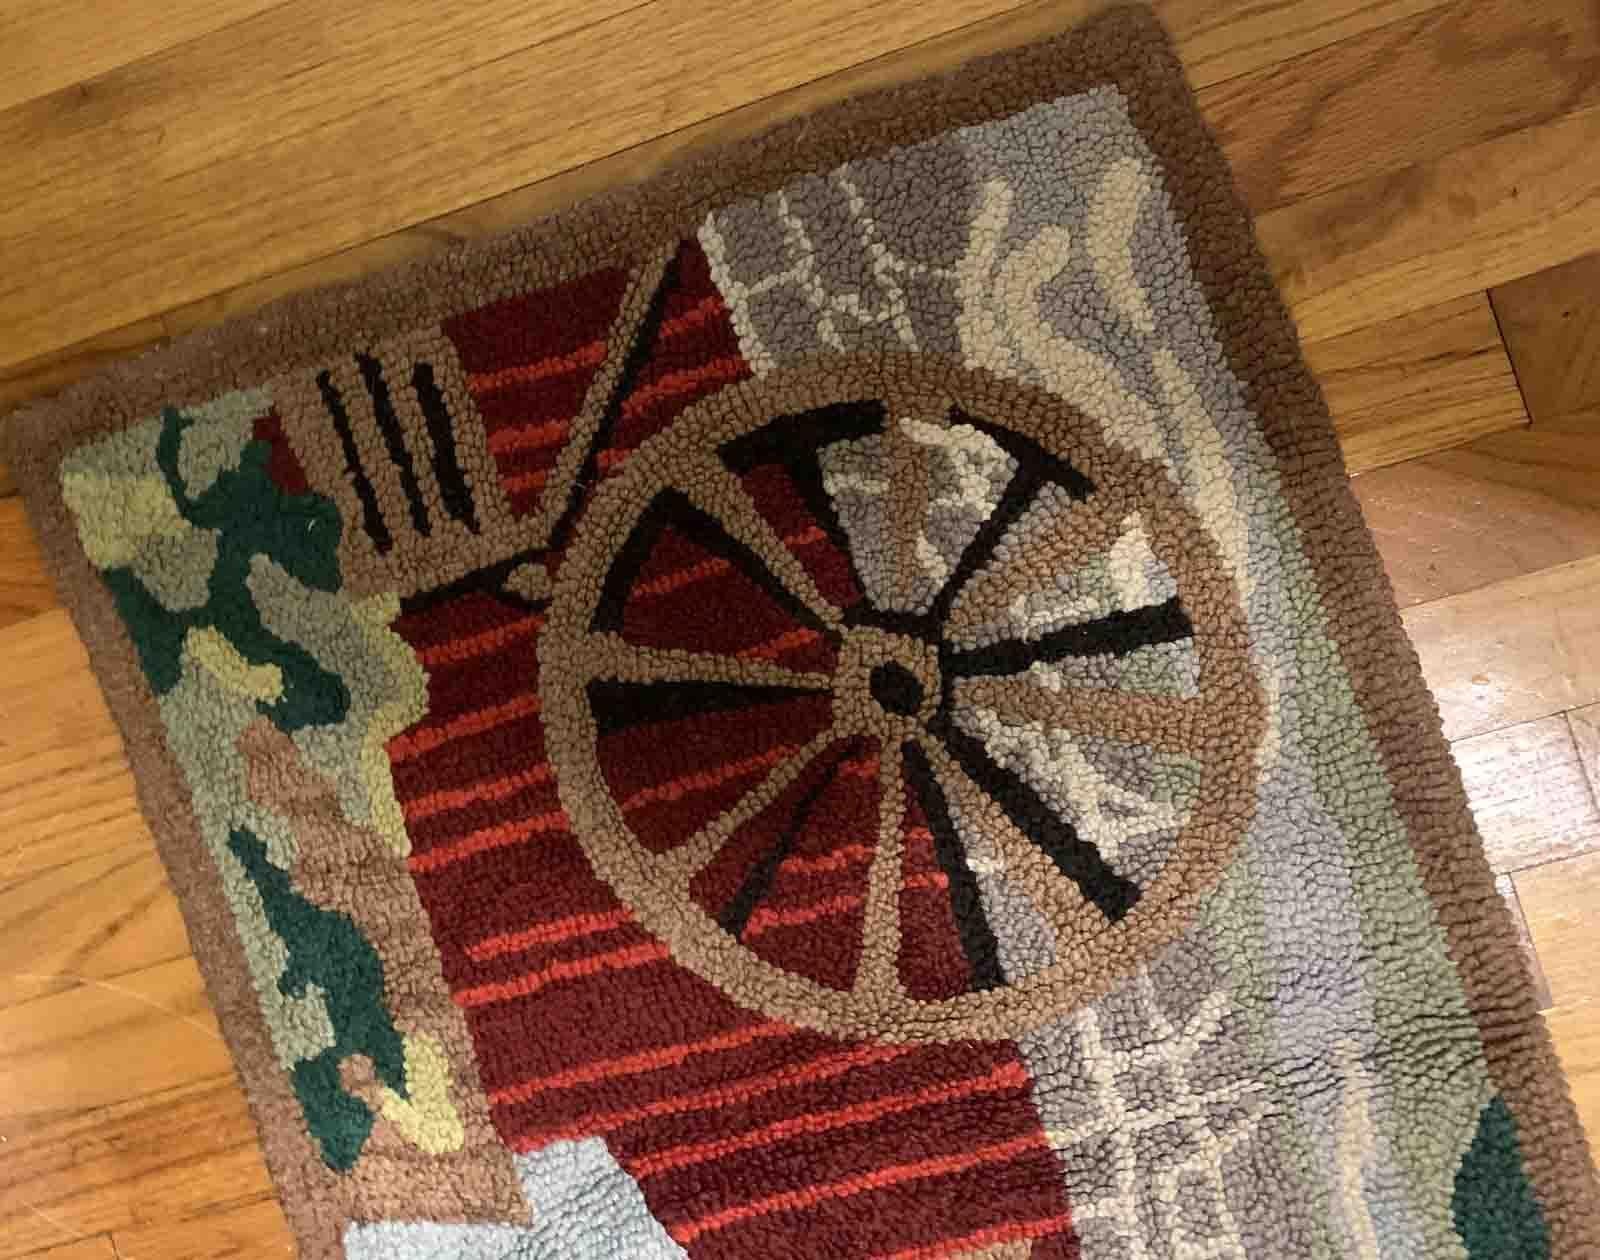 Handmade antique American Hooked rug in colorful shades. The rug is from the beginning of 20th century in original good condition. 

-condition: original good,

-circa: 1930s,

-size: 1.9' x 2.11' (58cm x 90cm),
?
-material: